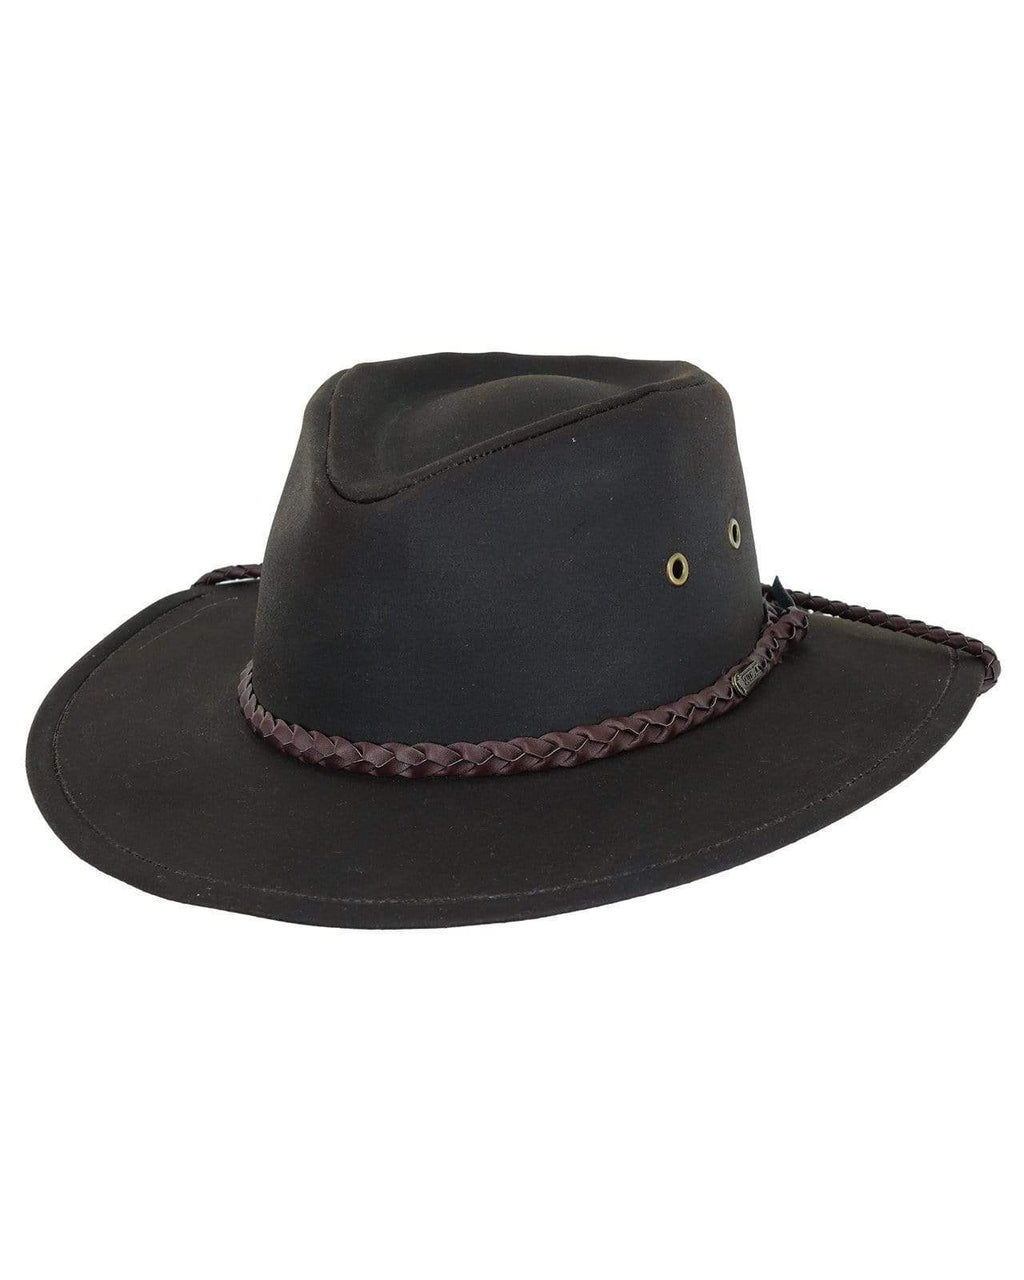 Grizzly | Oilskin Hats by Outback Trading Company | OutbackTrading.com